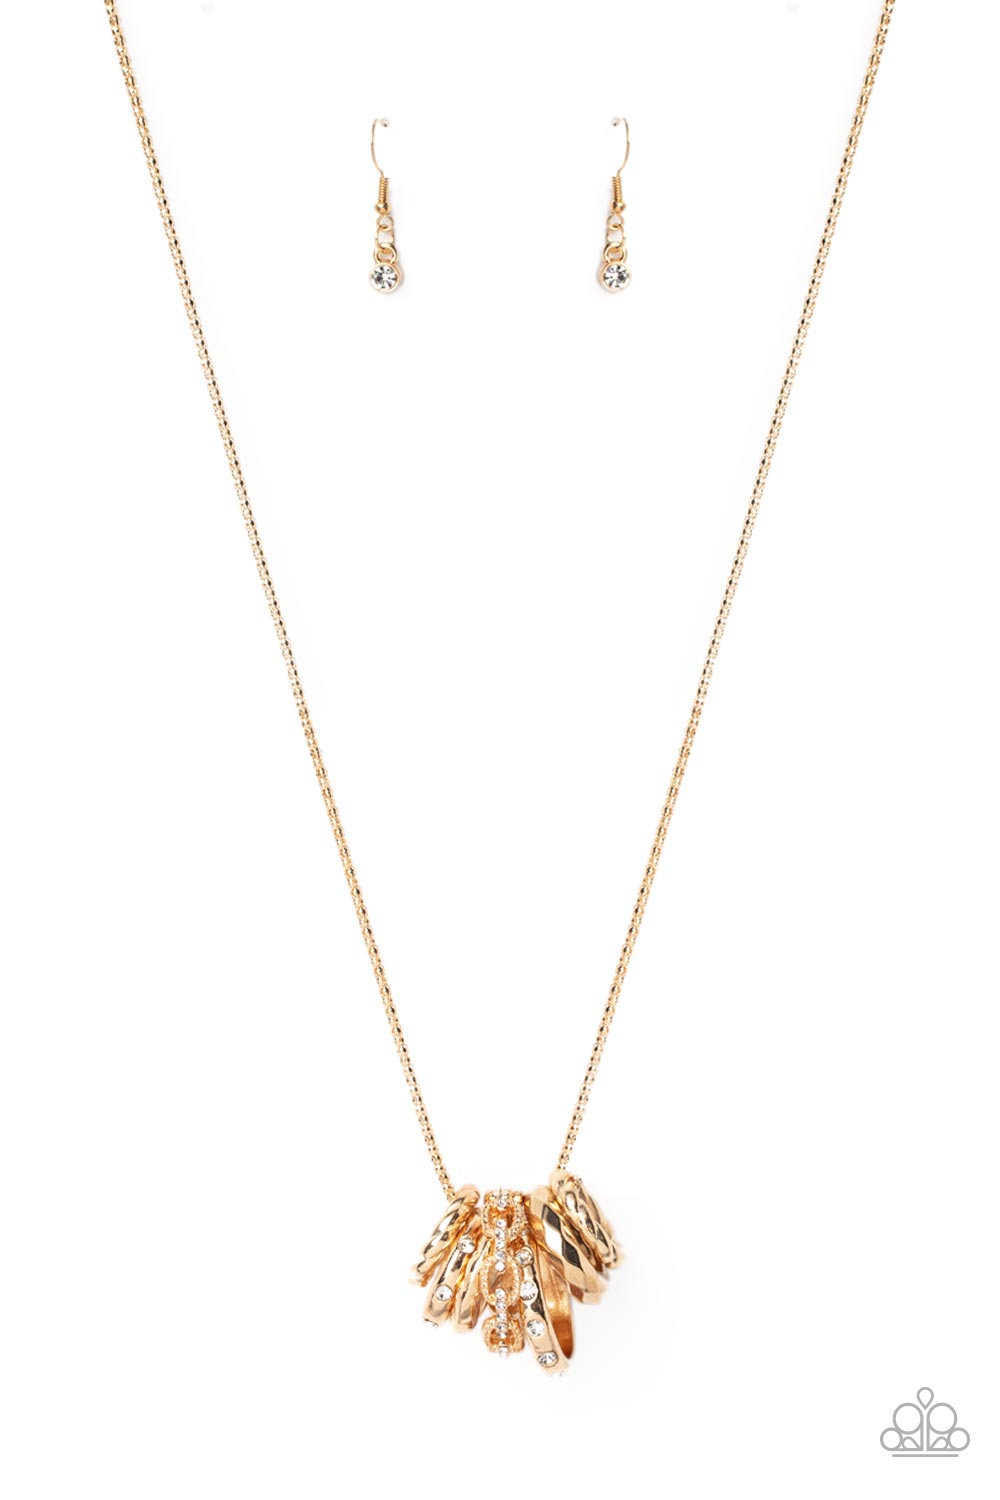 Audacious Attitude - Gold - Bling With Crystal